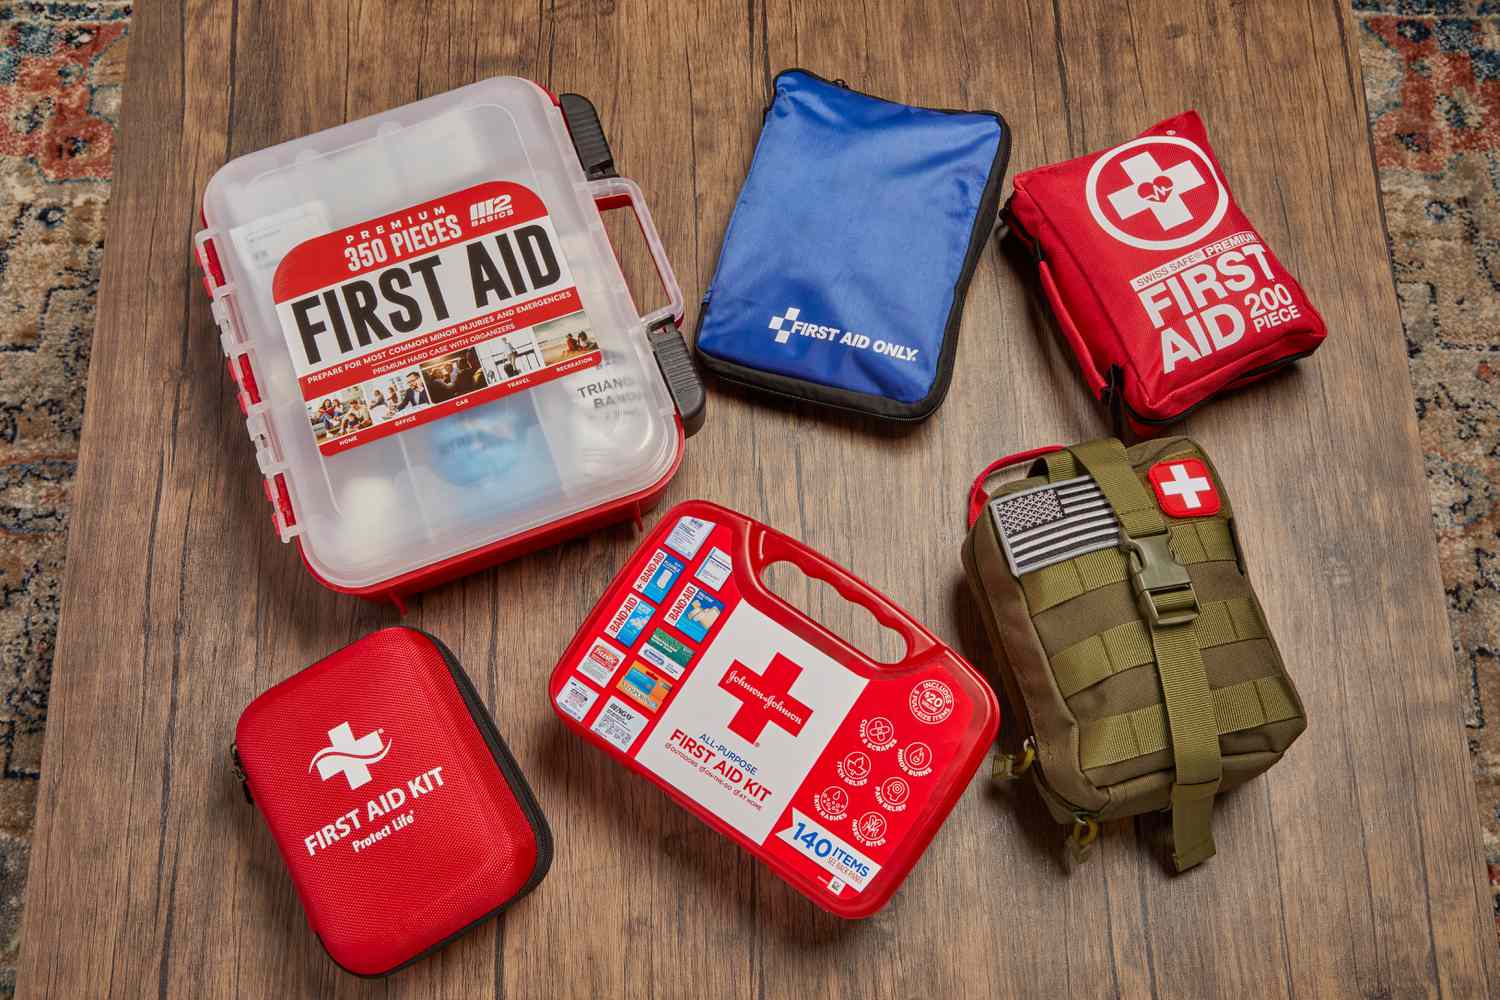 What Is The Purpose Of A First Aid Kit?